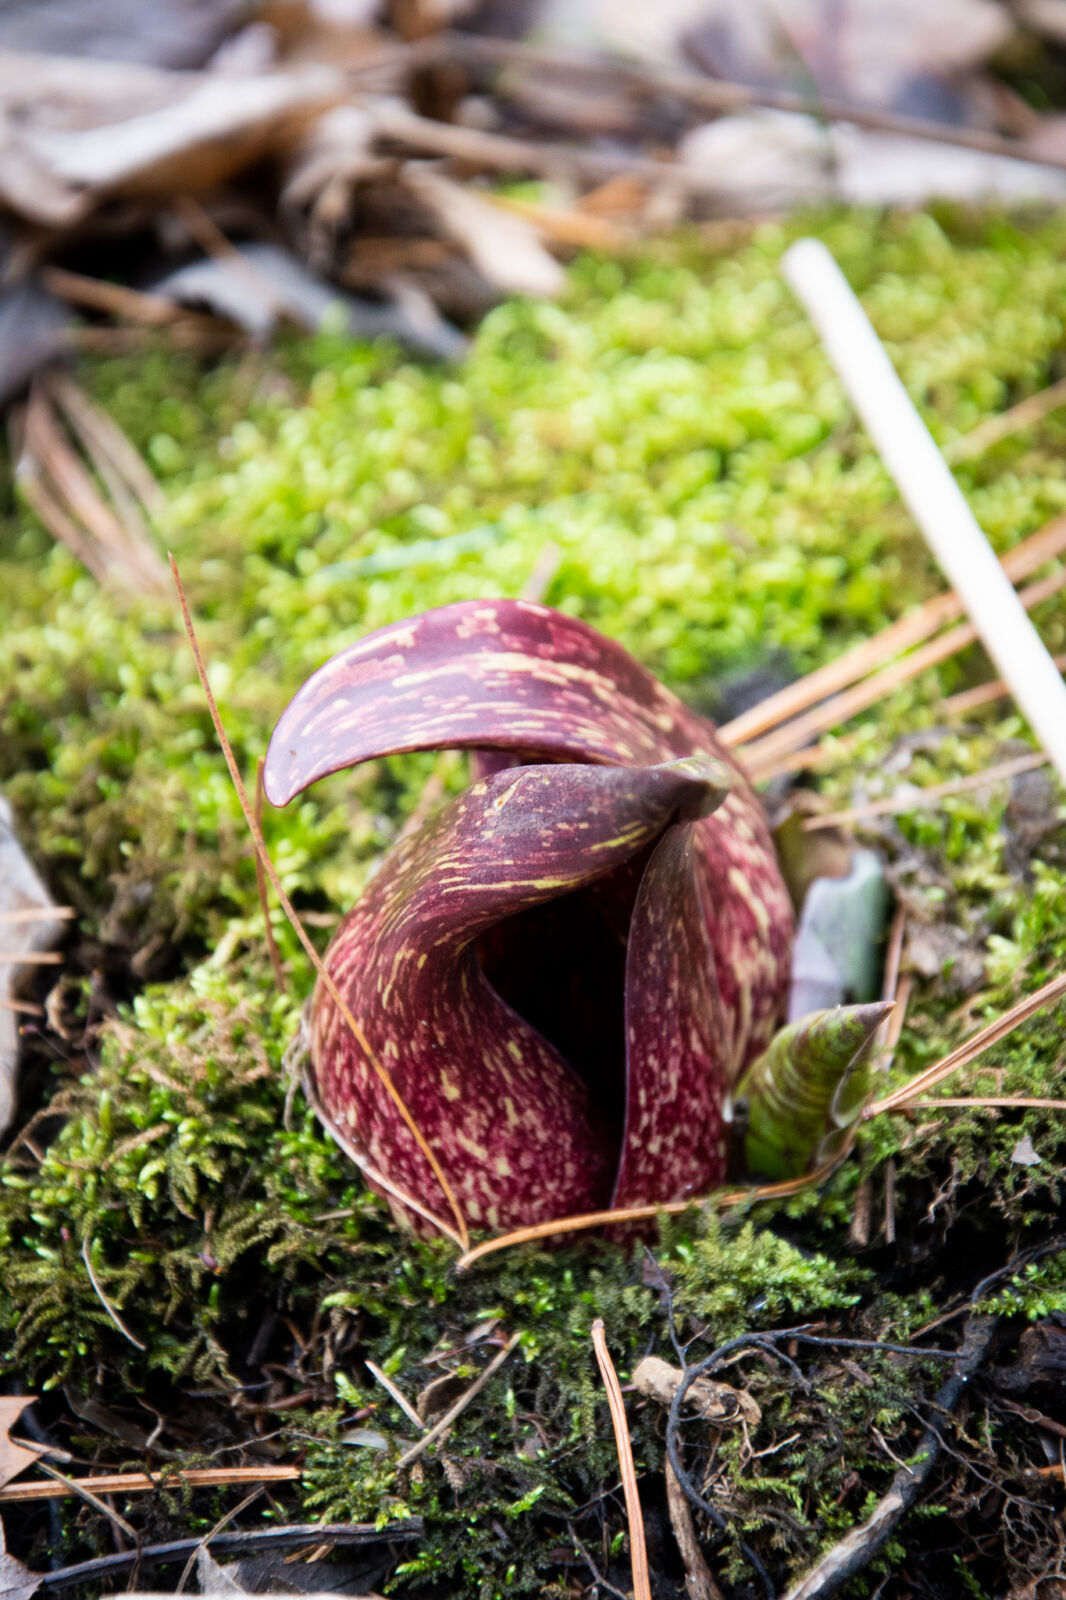 The mottled, purplish spathes of skunk cabbage, Symplocarpus foetidus, emerge from the moss covered earth.